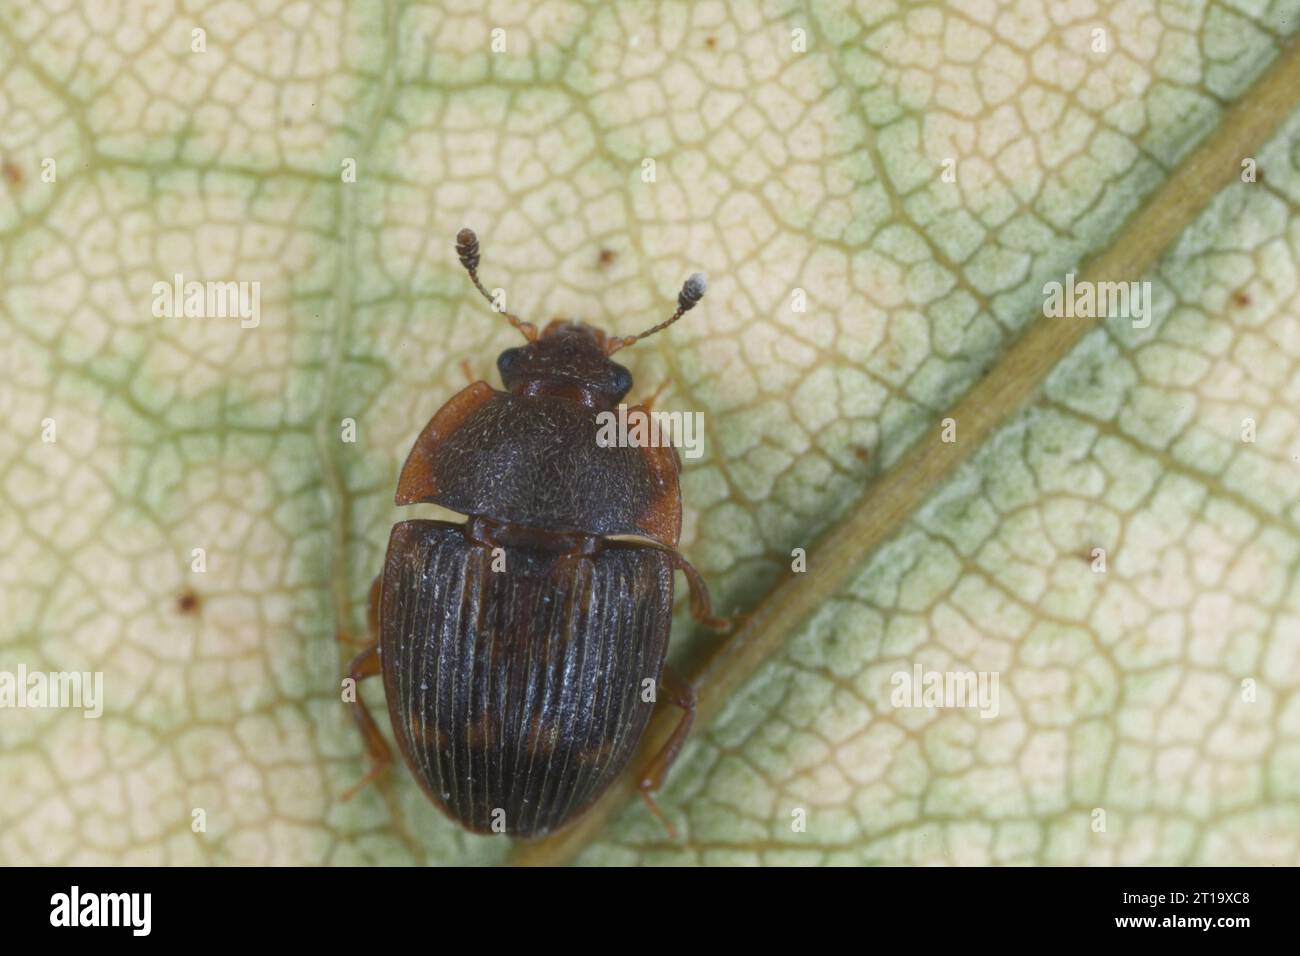 Stelidota geminata, the strawberry sap beetle in the family Nitidulidae. Native to the Americas and introduced to Europe. Stock Photo